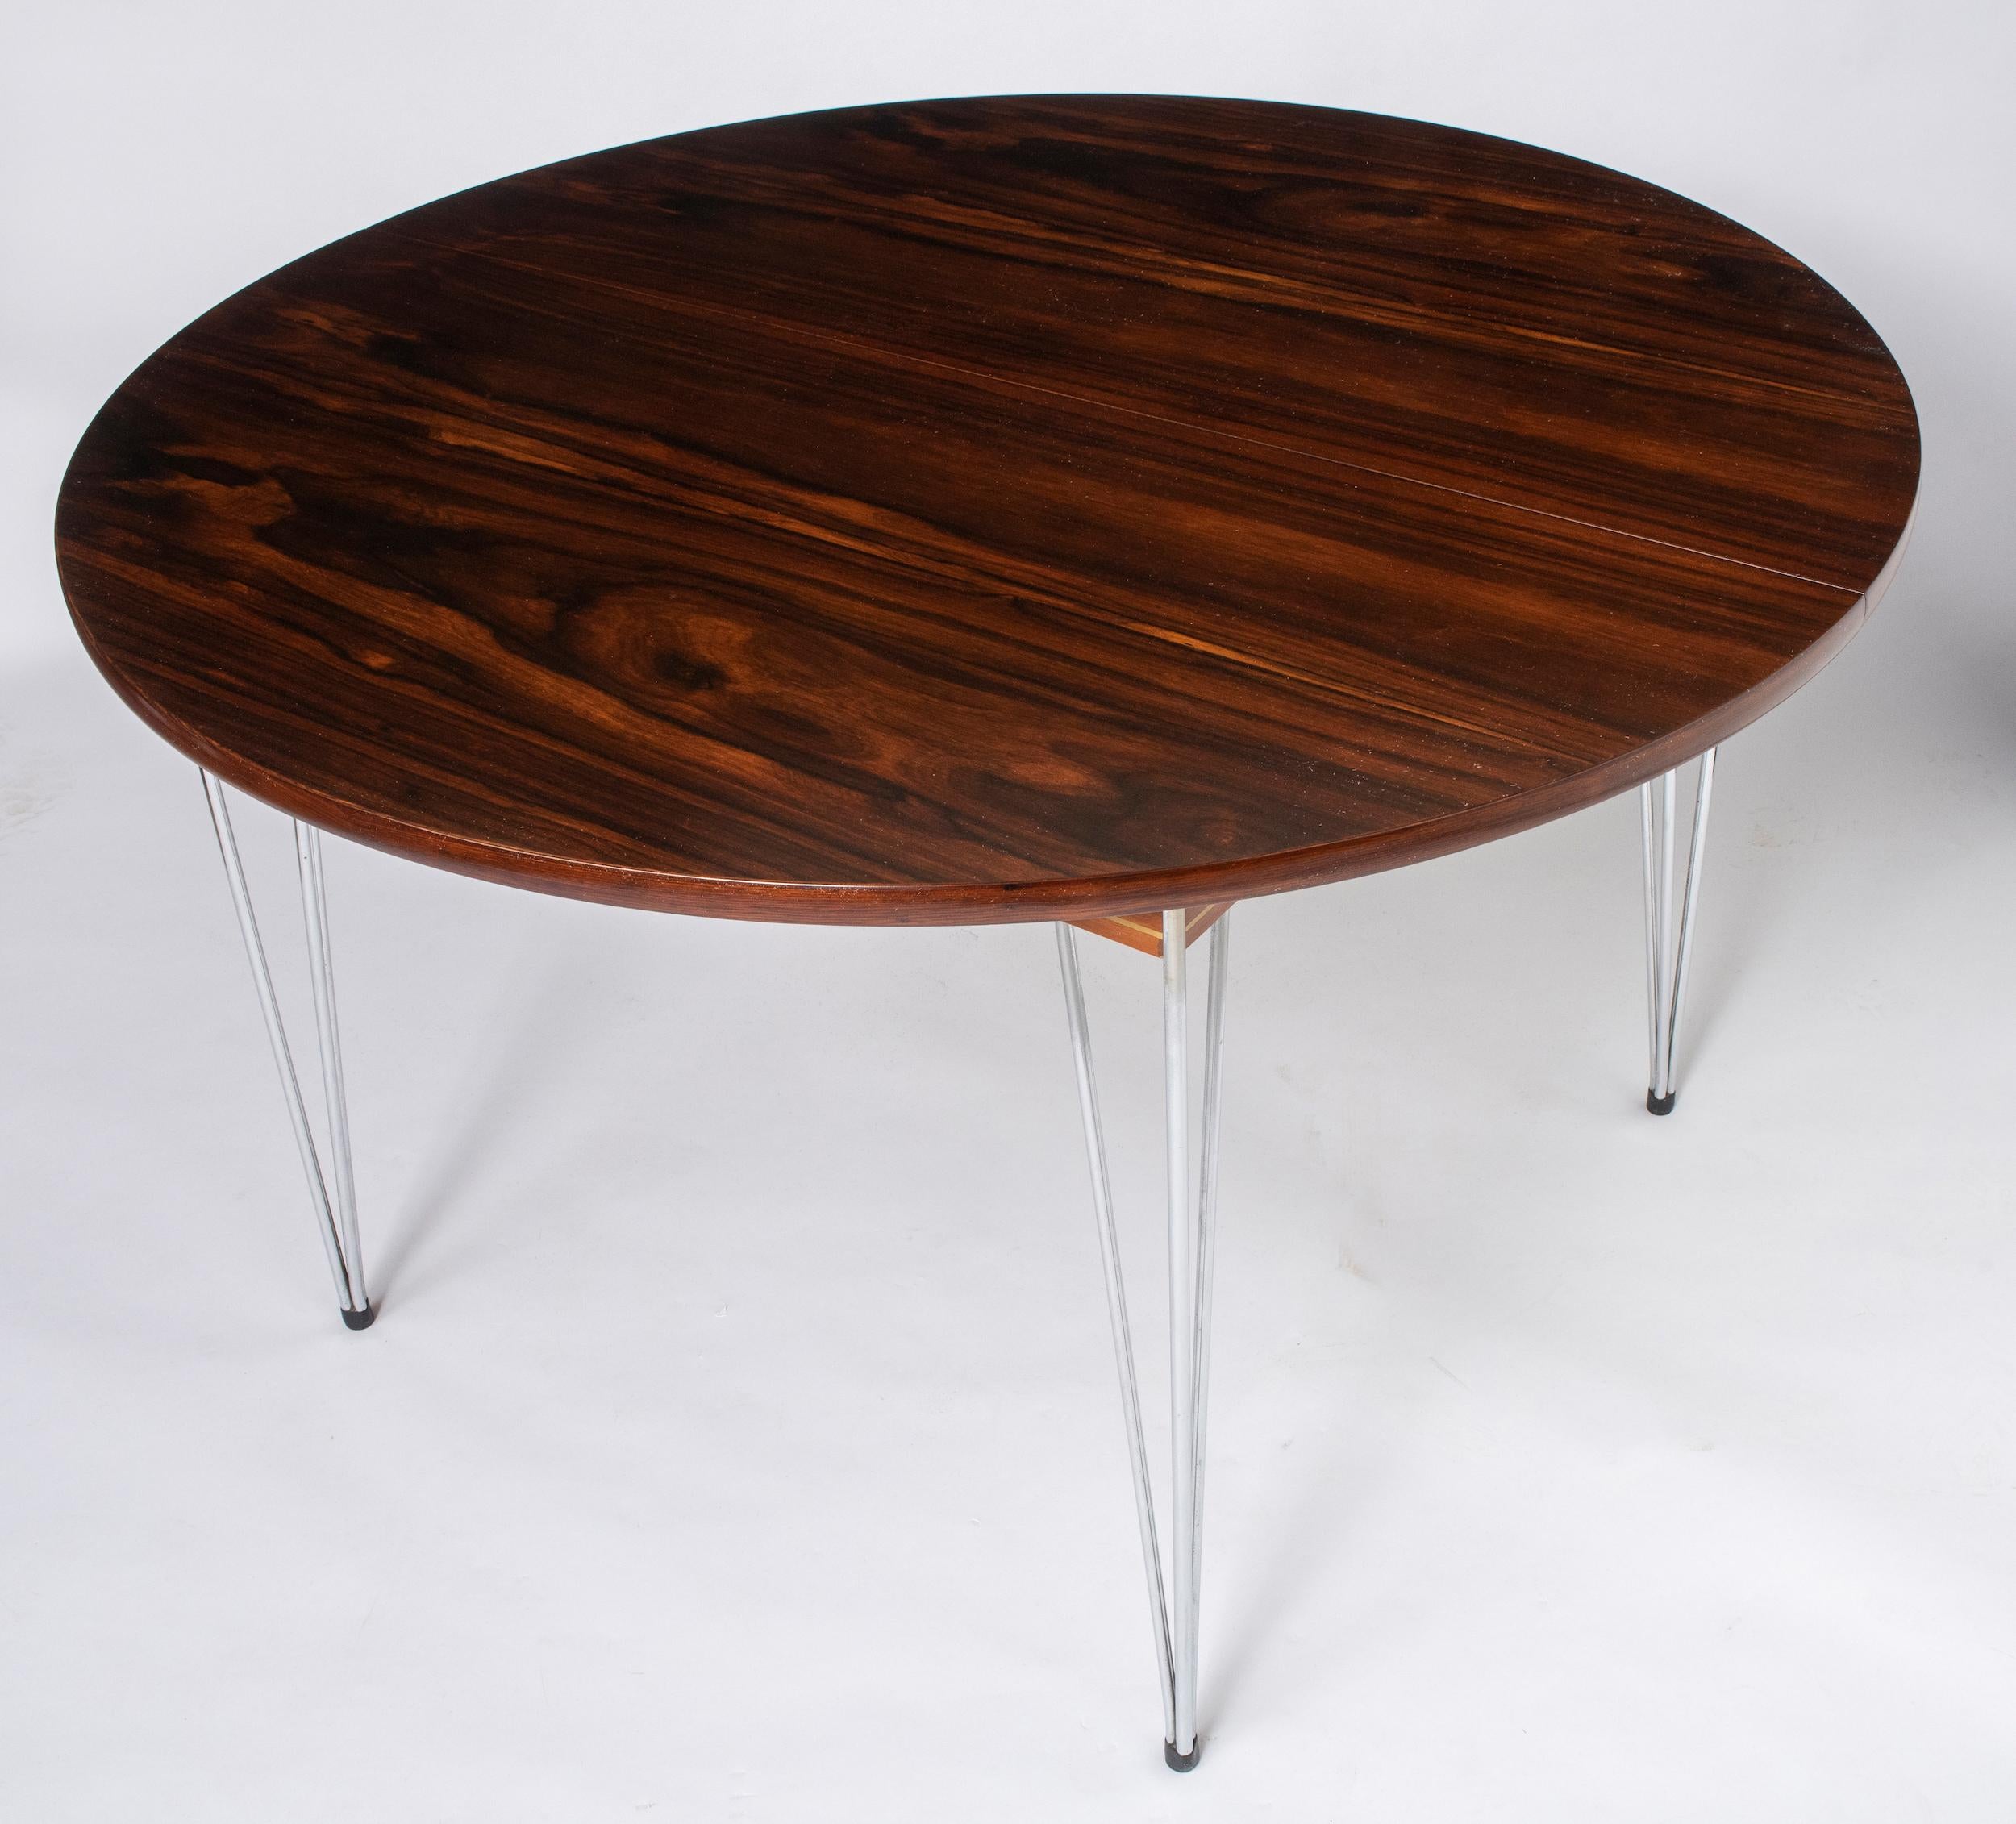 Scandinavian Rosewood Dining Table by Hans Brattrud, Norway circa 1957 In Good Condition For Sale In Macclesfield, Cheshire